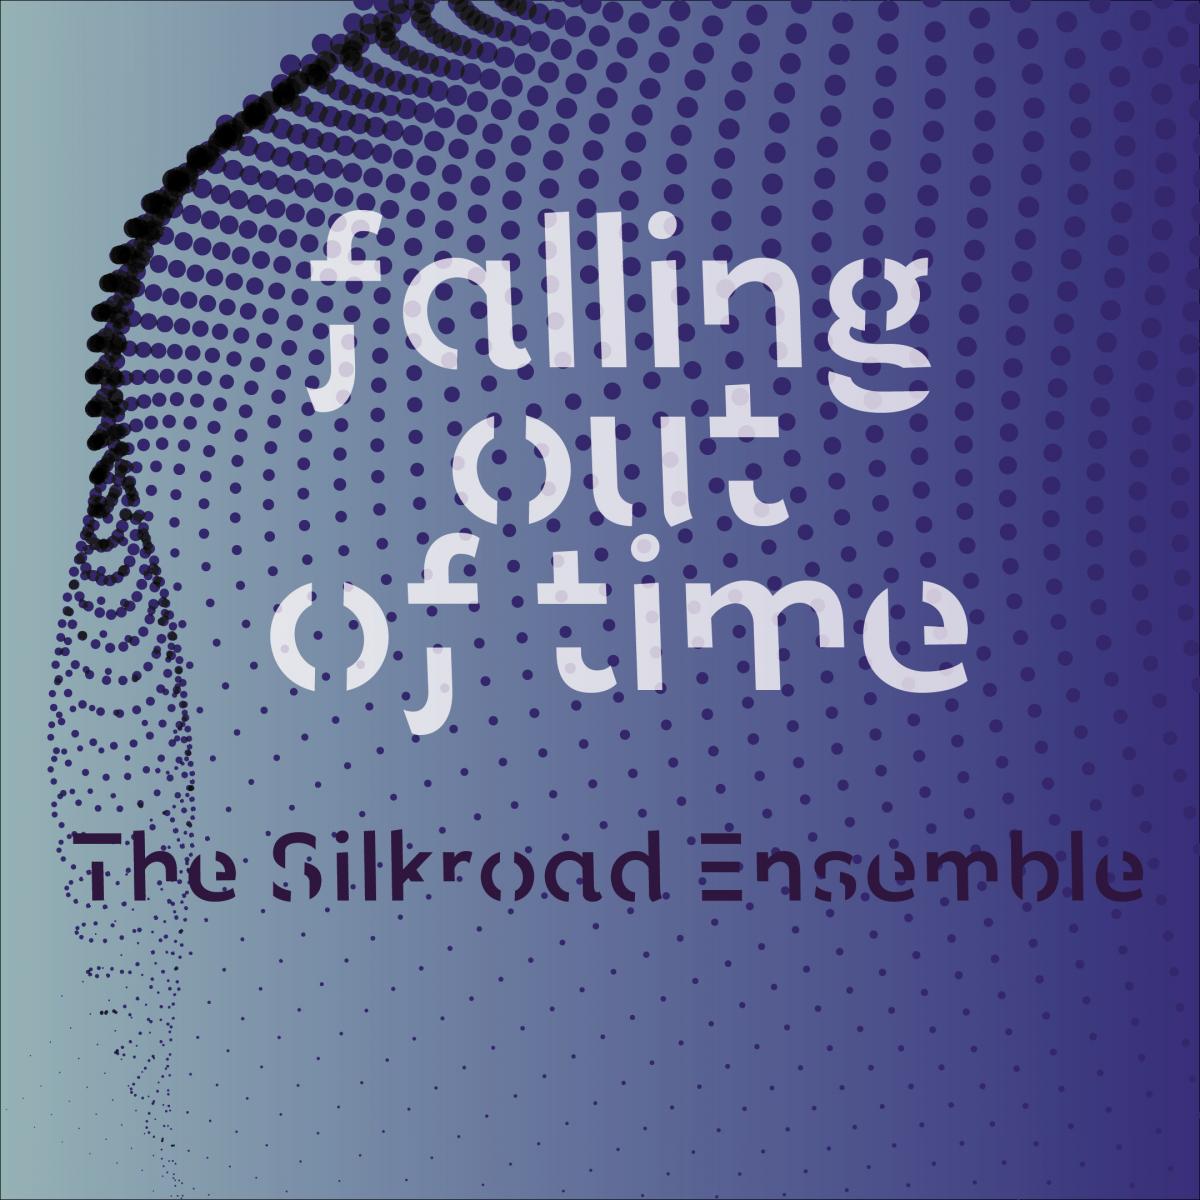 Falling out of time - the silkroad ensable